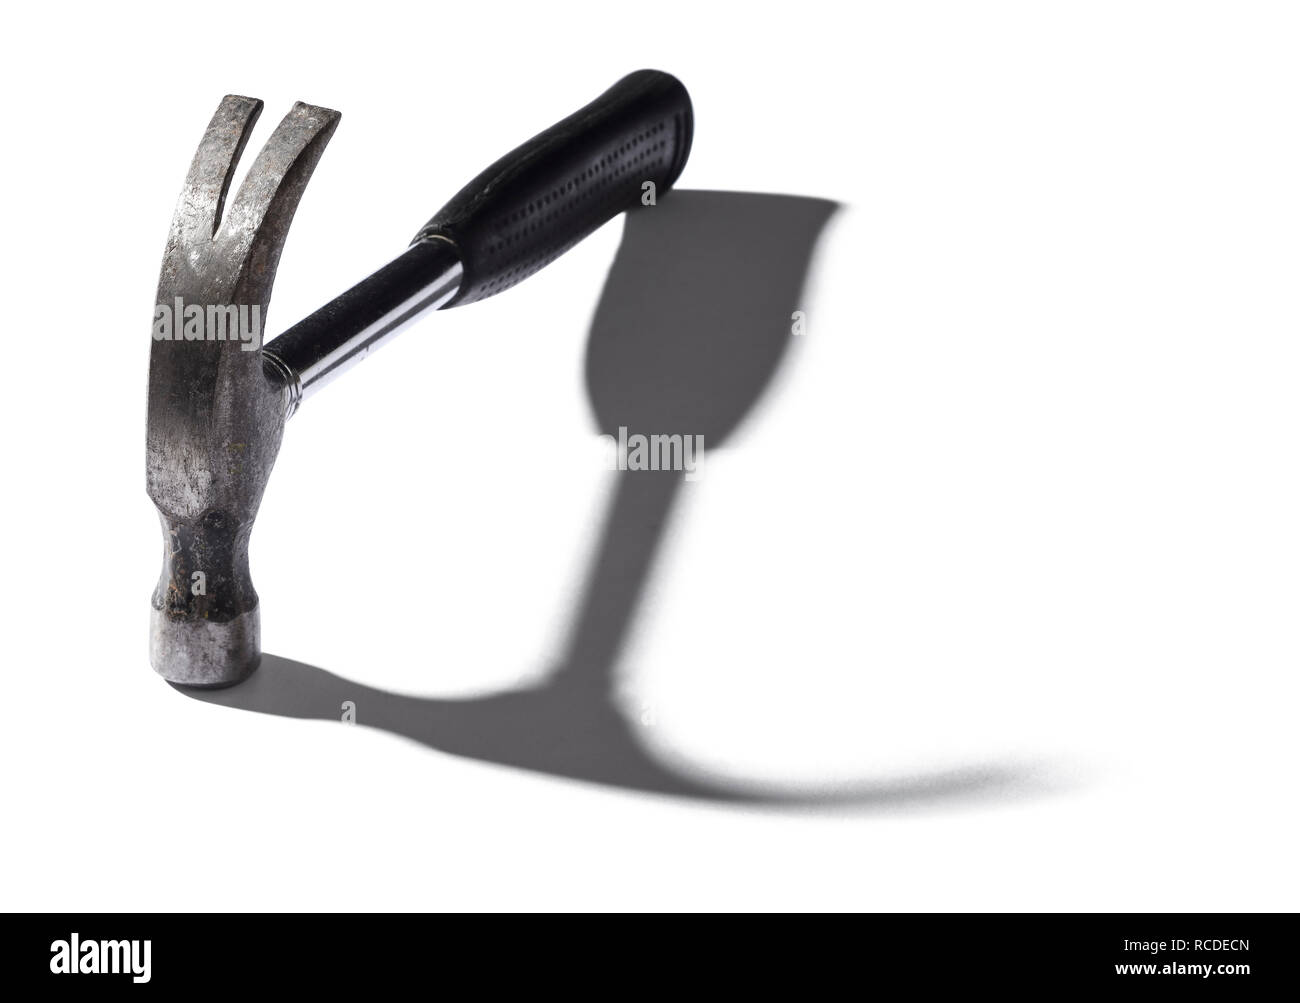 A curved claw hammer Stock Photo